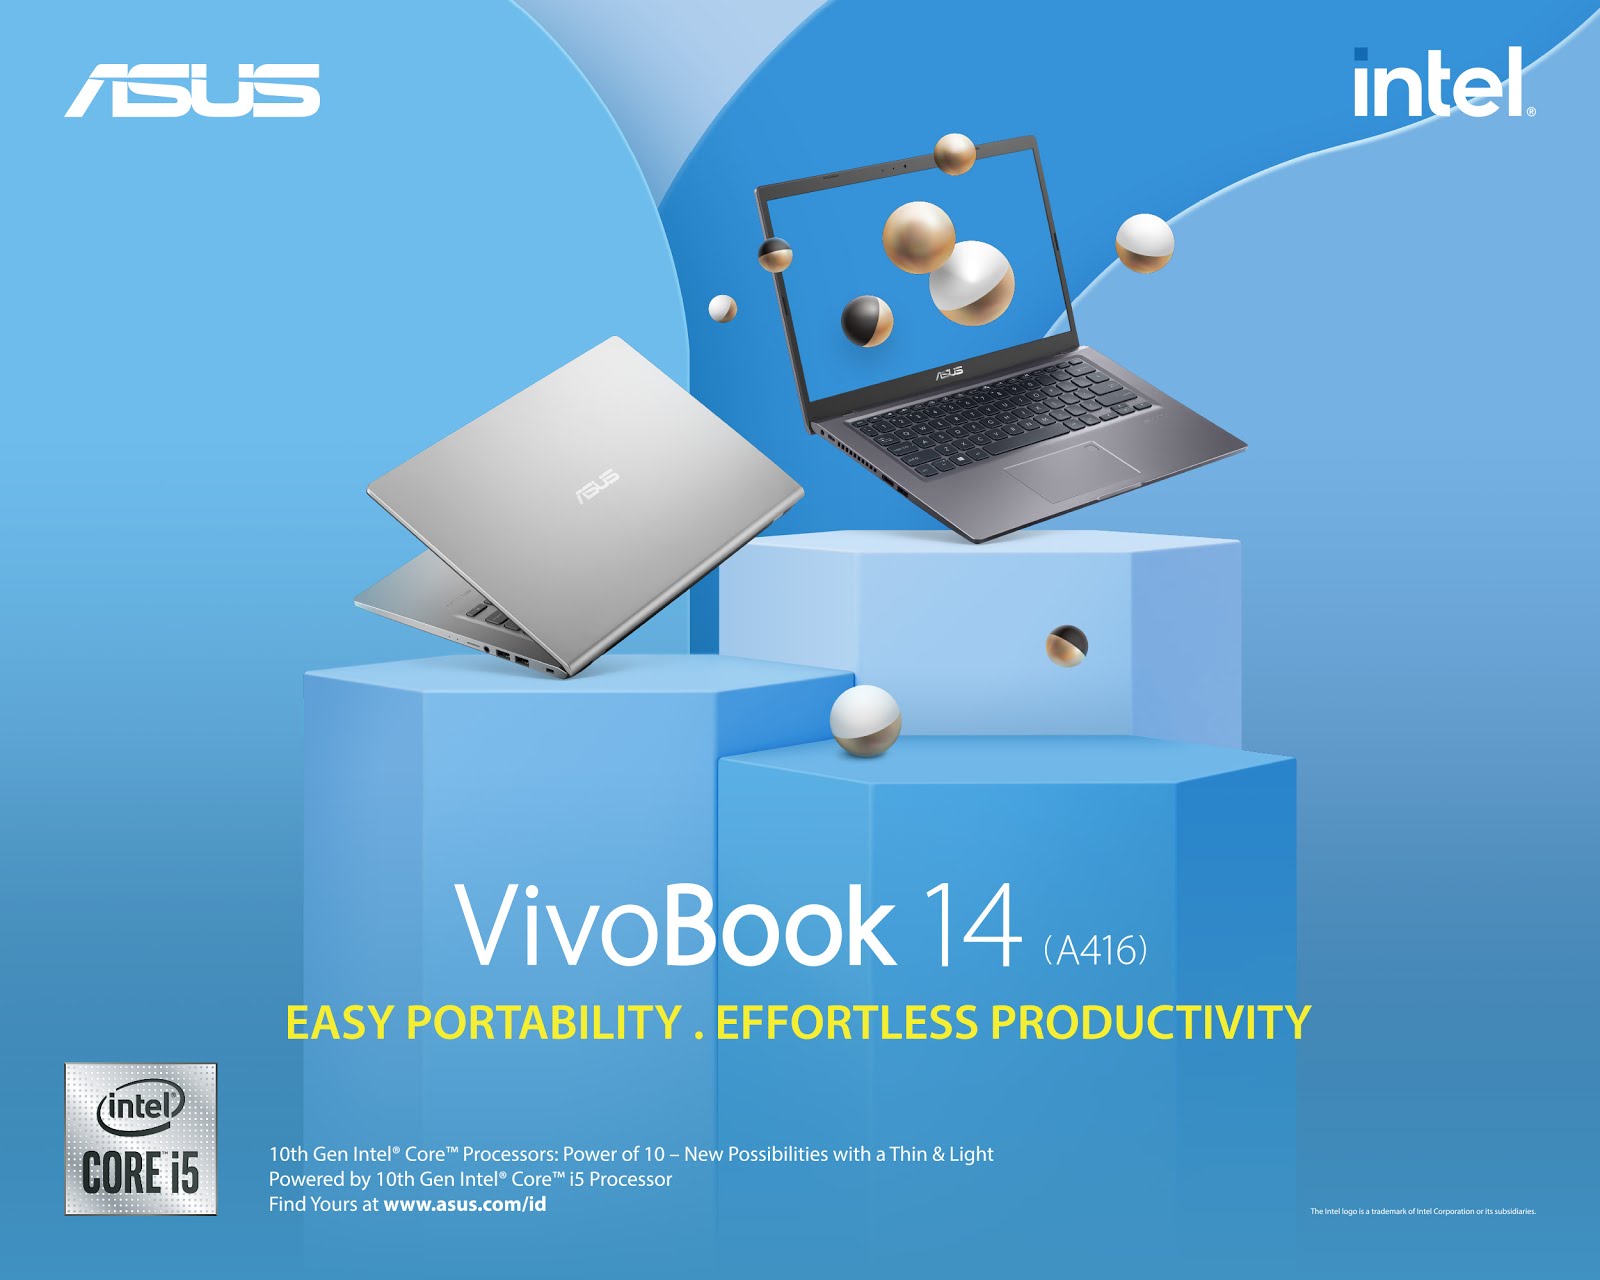 ASUS VivoBook 14 (A416) Blog Competition